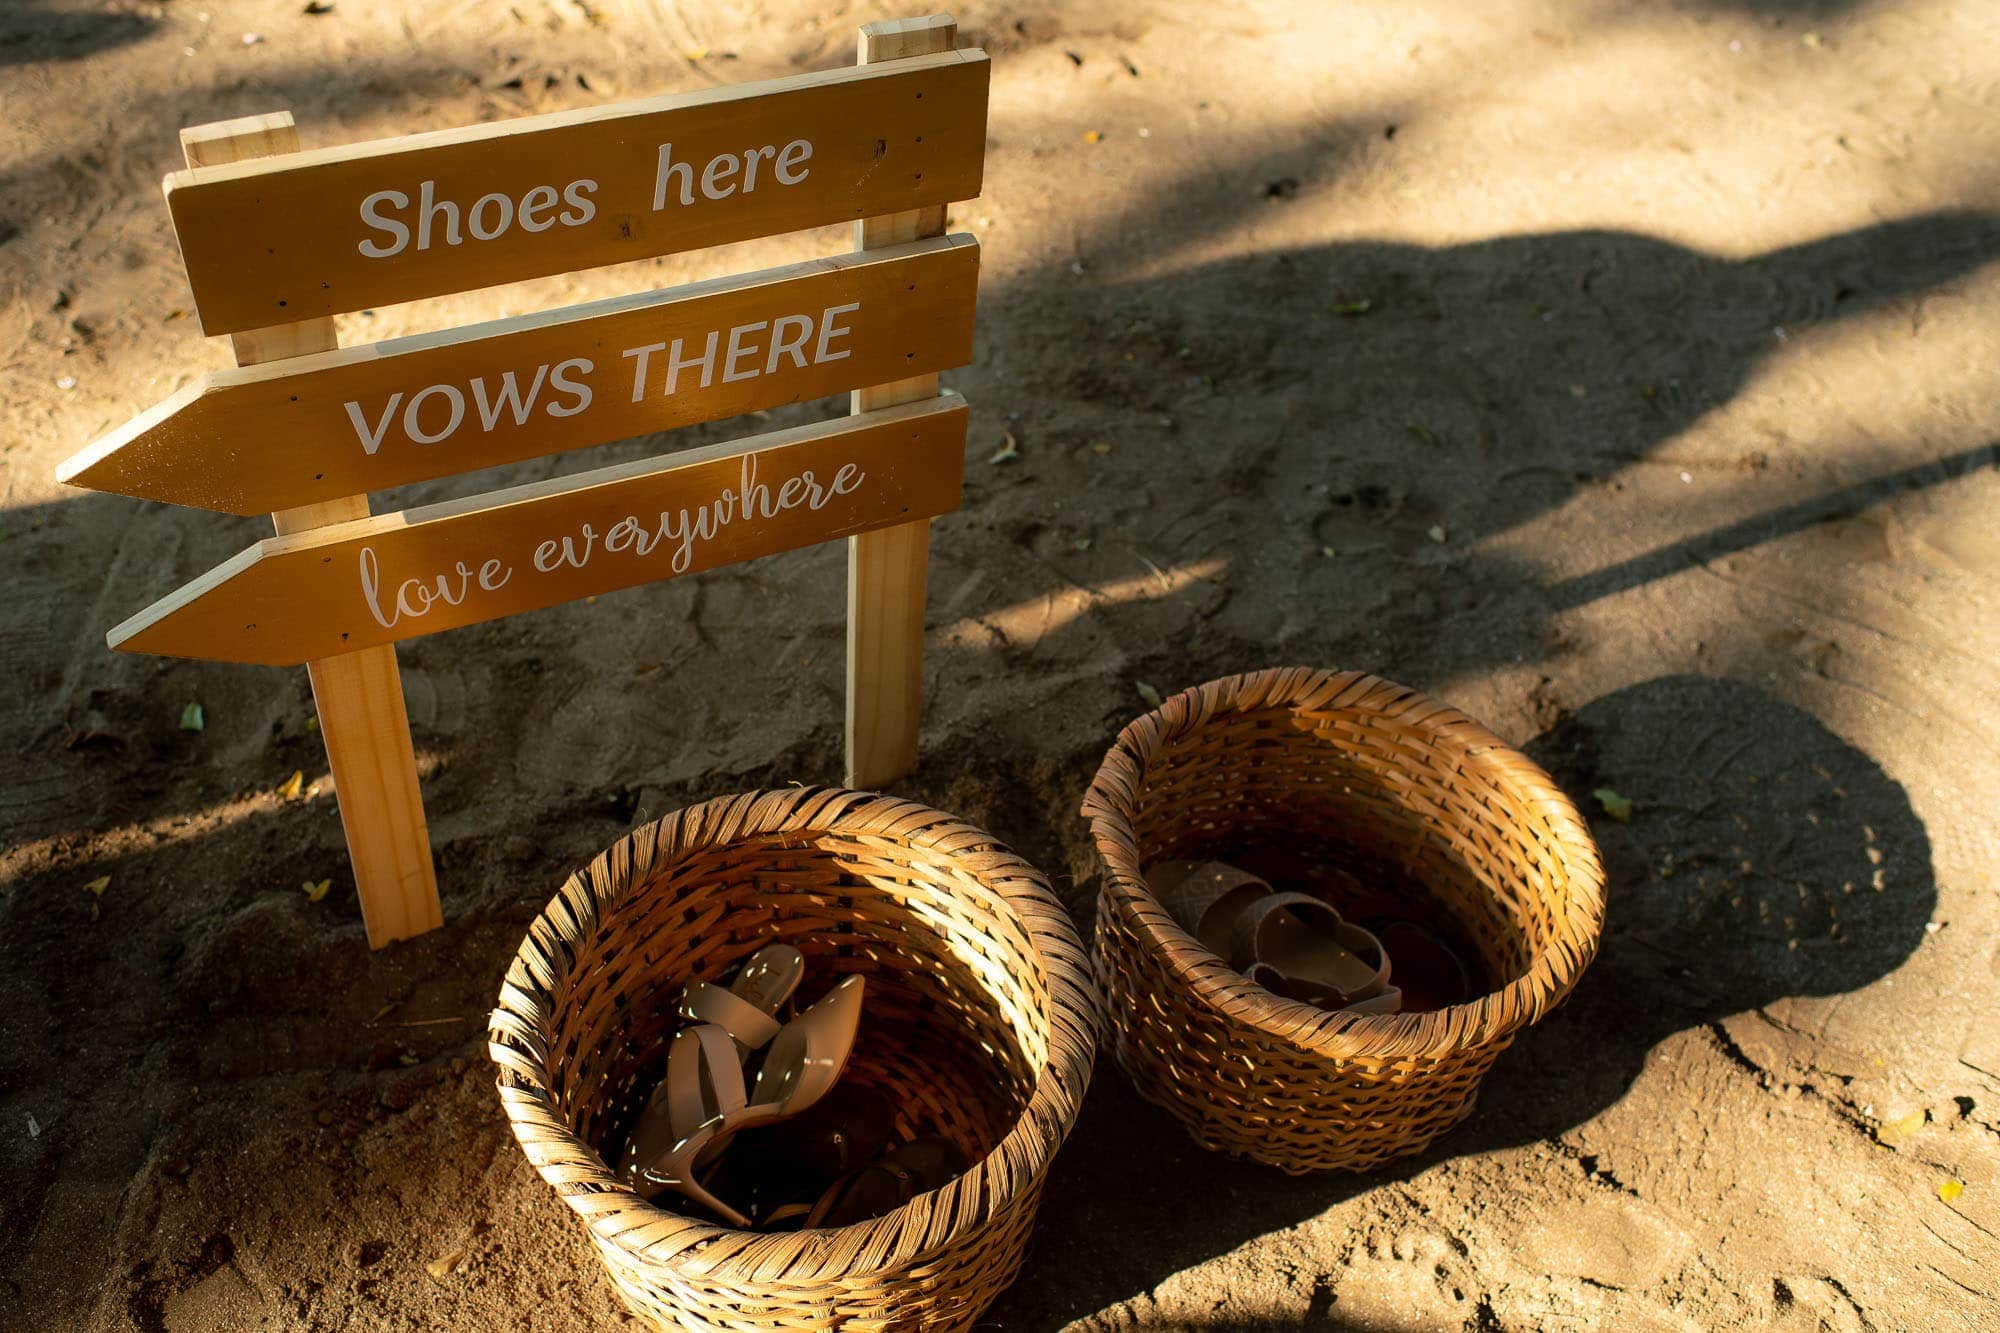 baskets for shoes and a sign that says "shoes here, vows there, love everywhere"